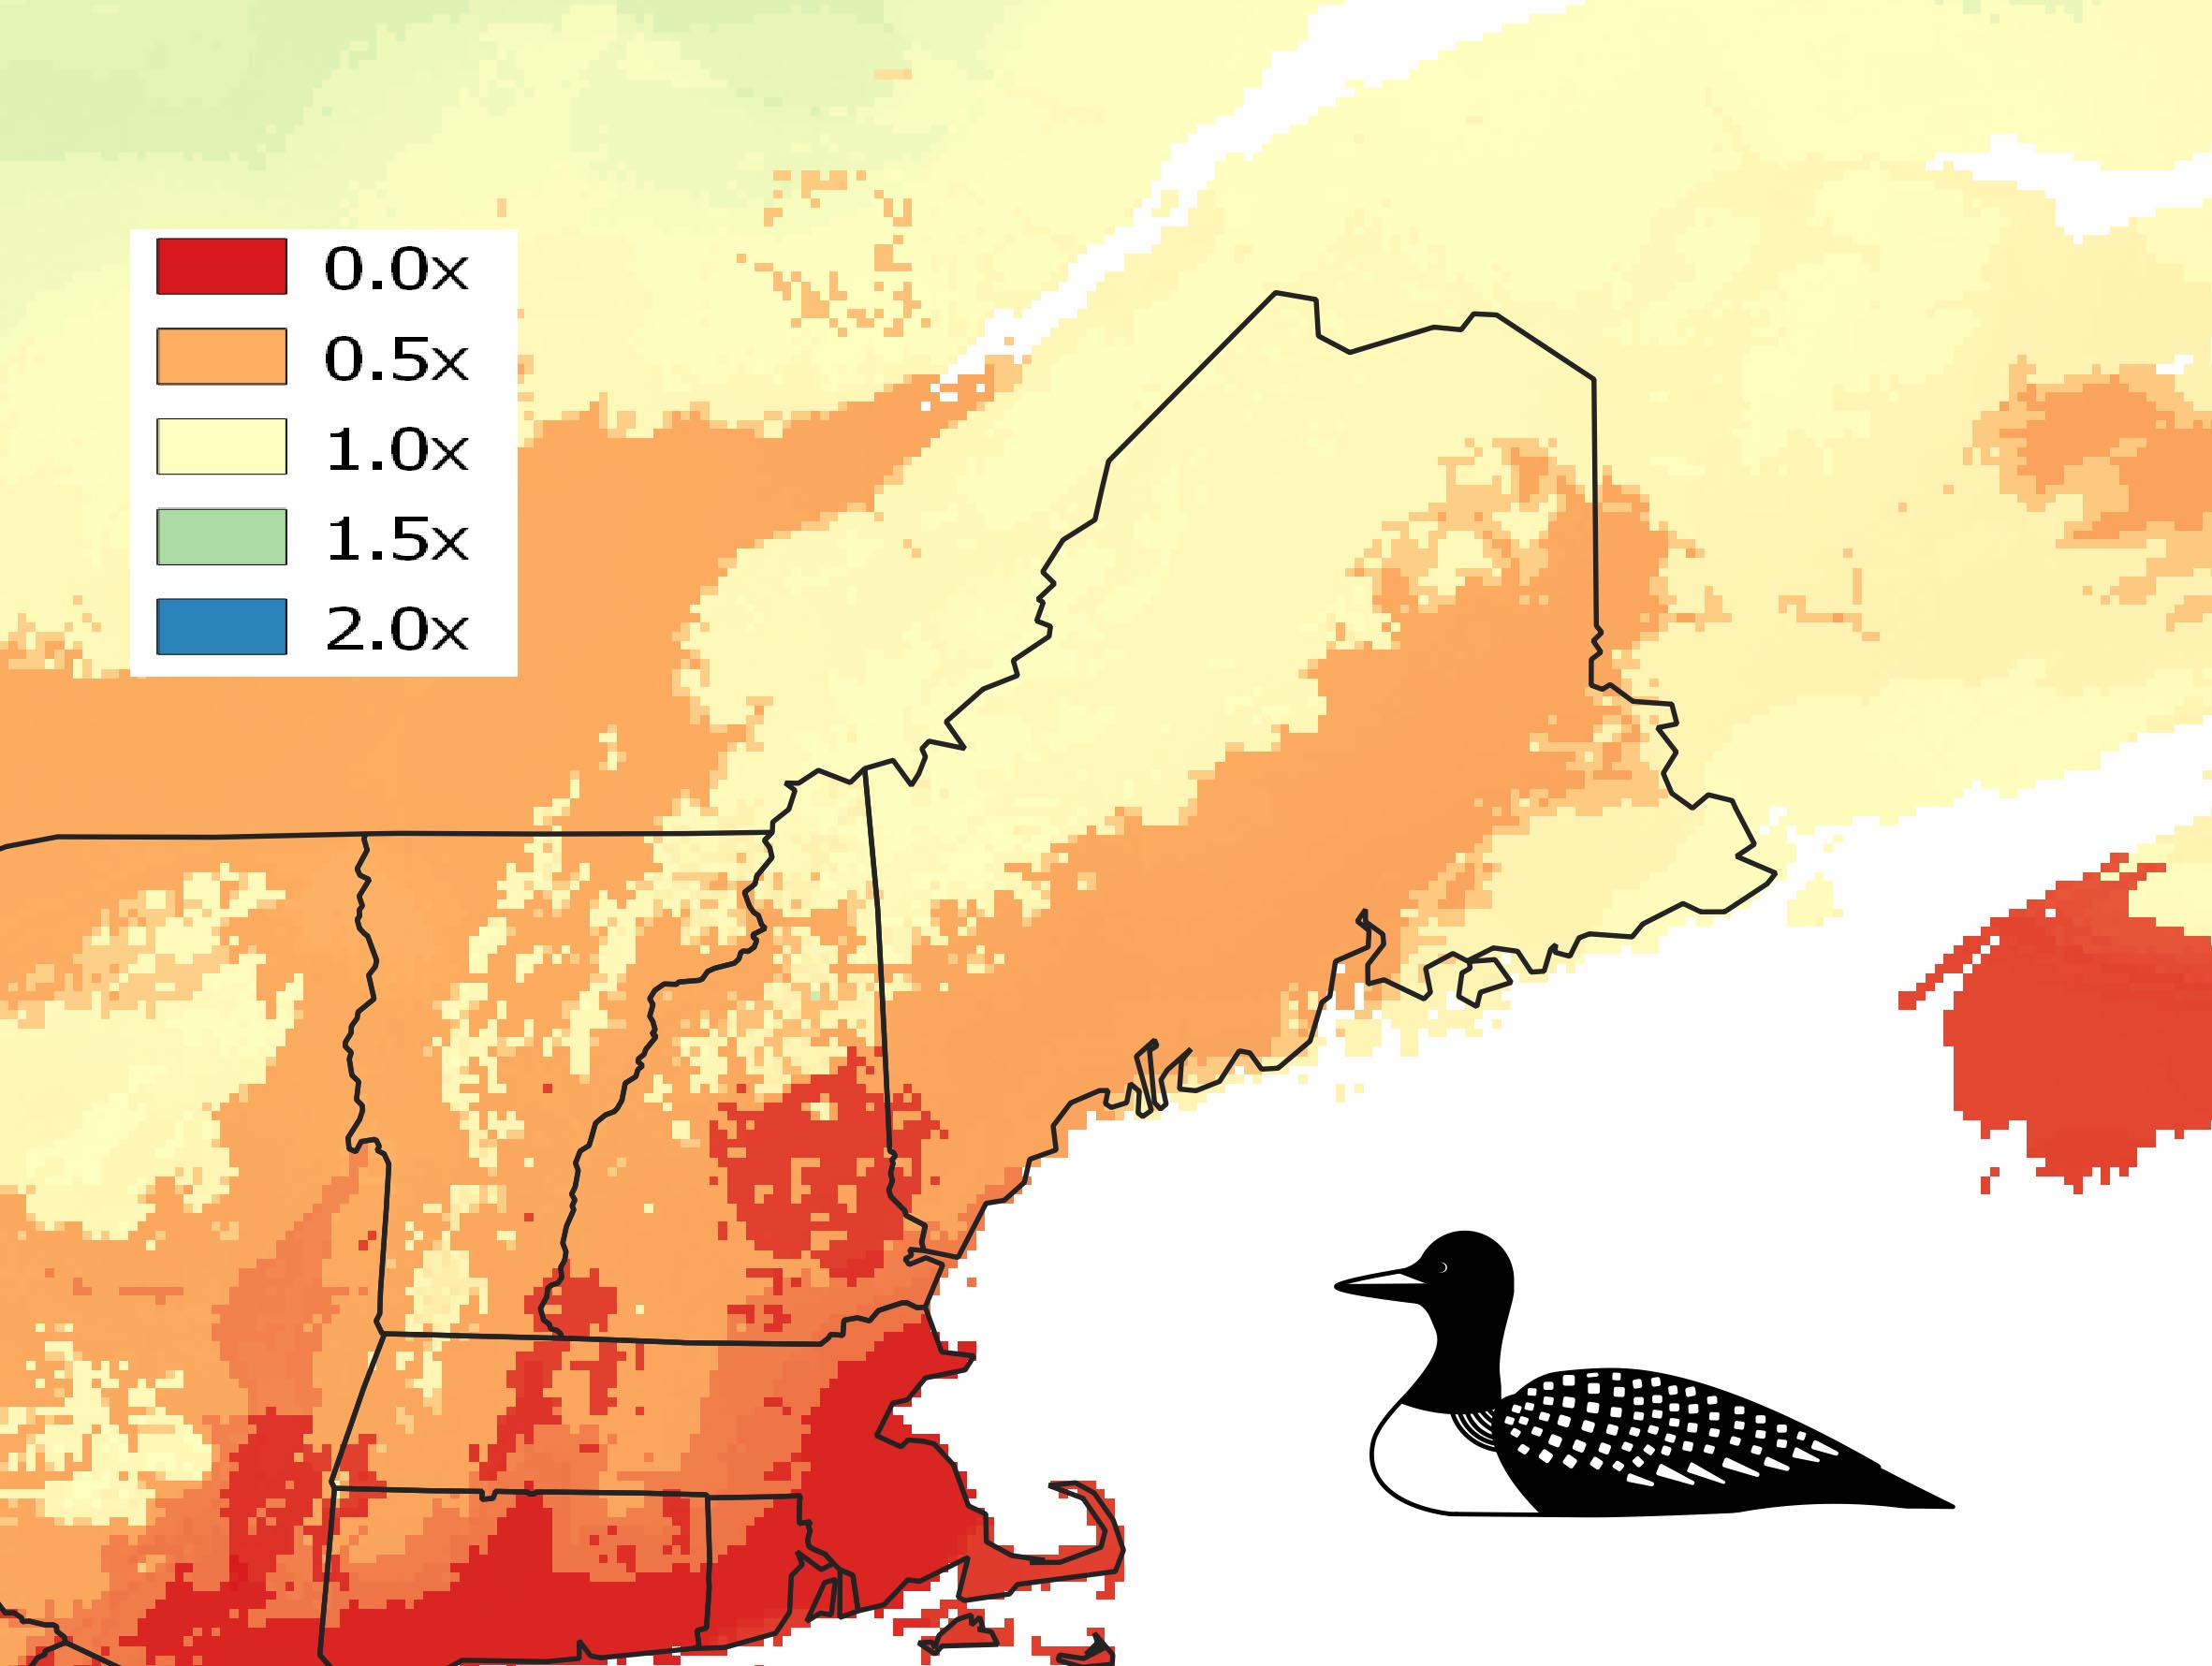 Map of New England and Southern Canada show shifts in loon populations with more northern areas being less affected than by southern areas like Massachusetts, Rhode Island, and New York among others.